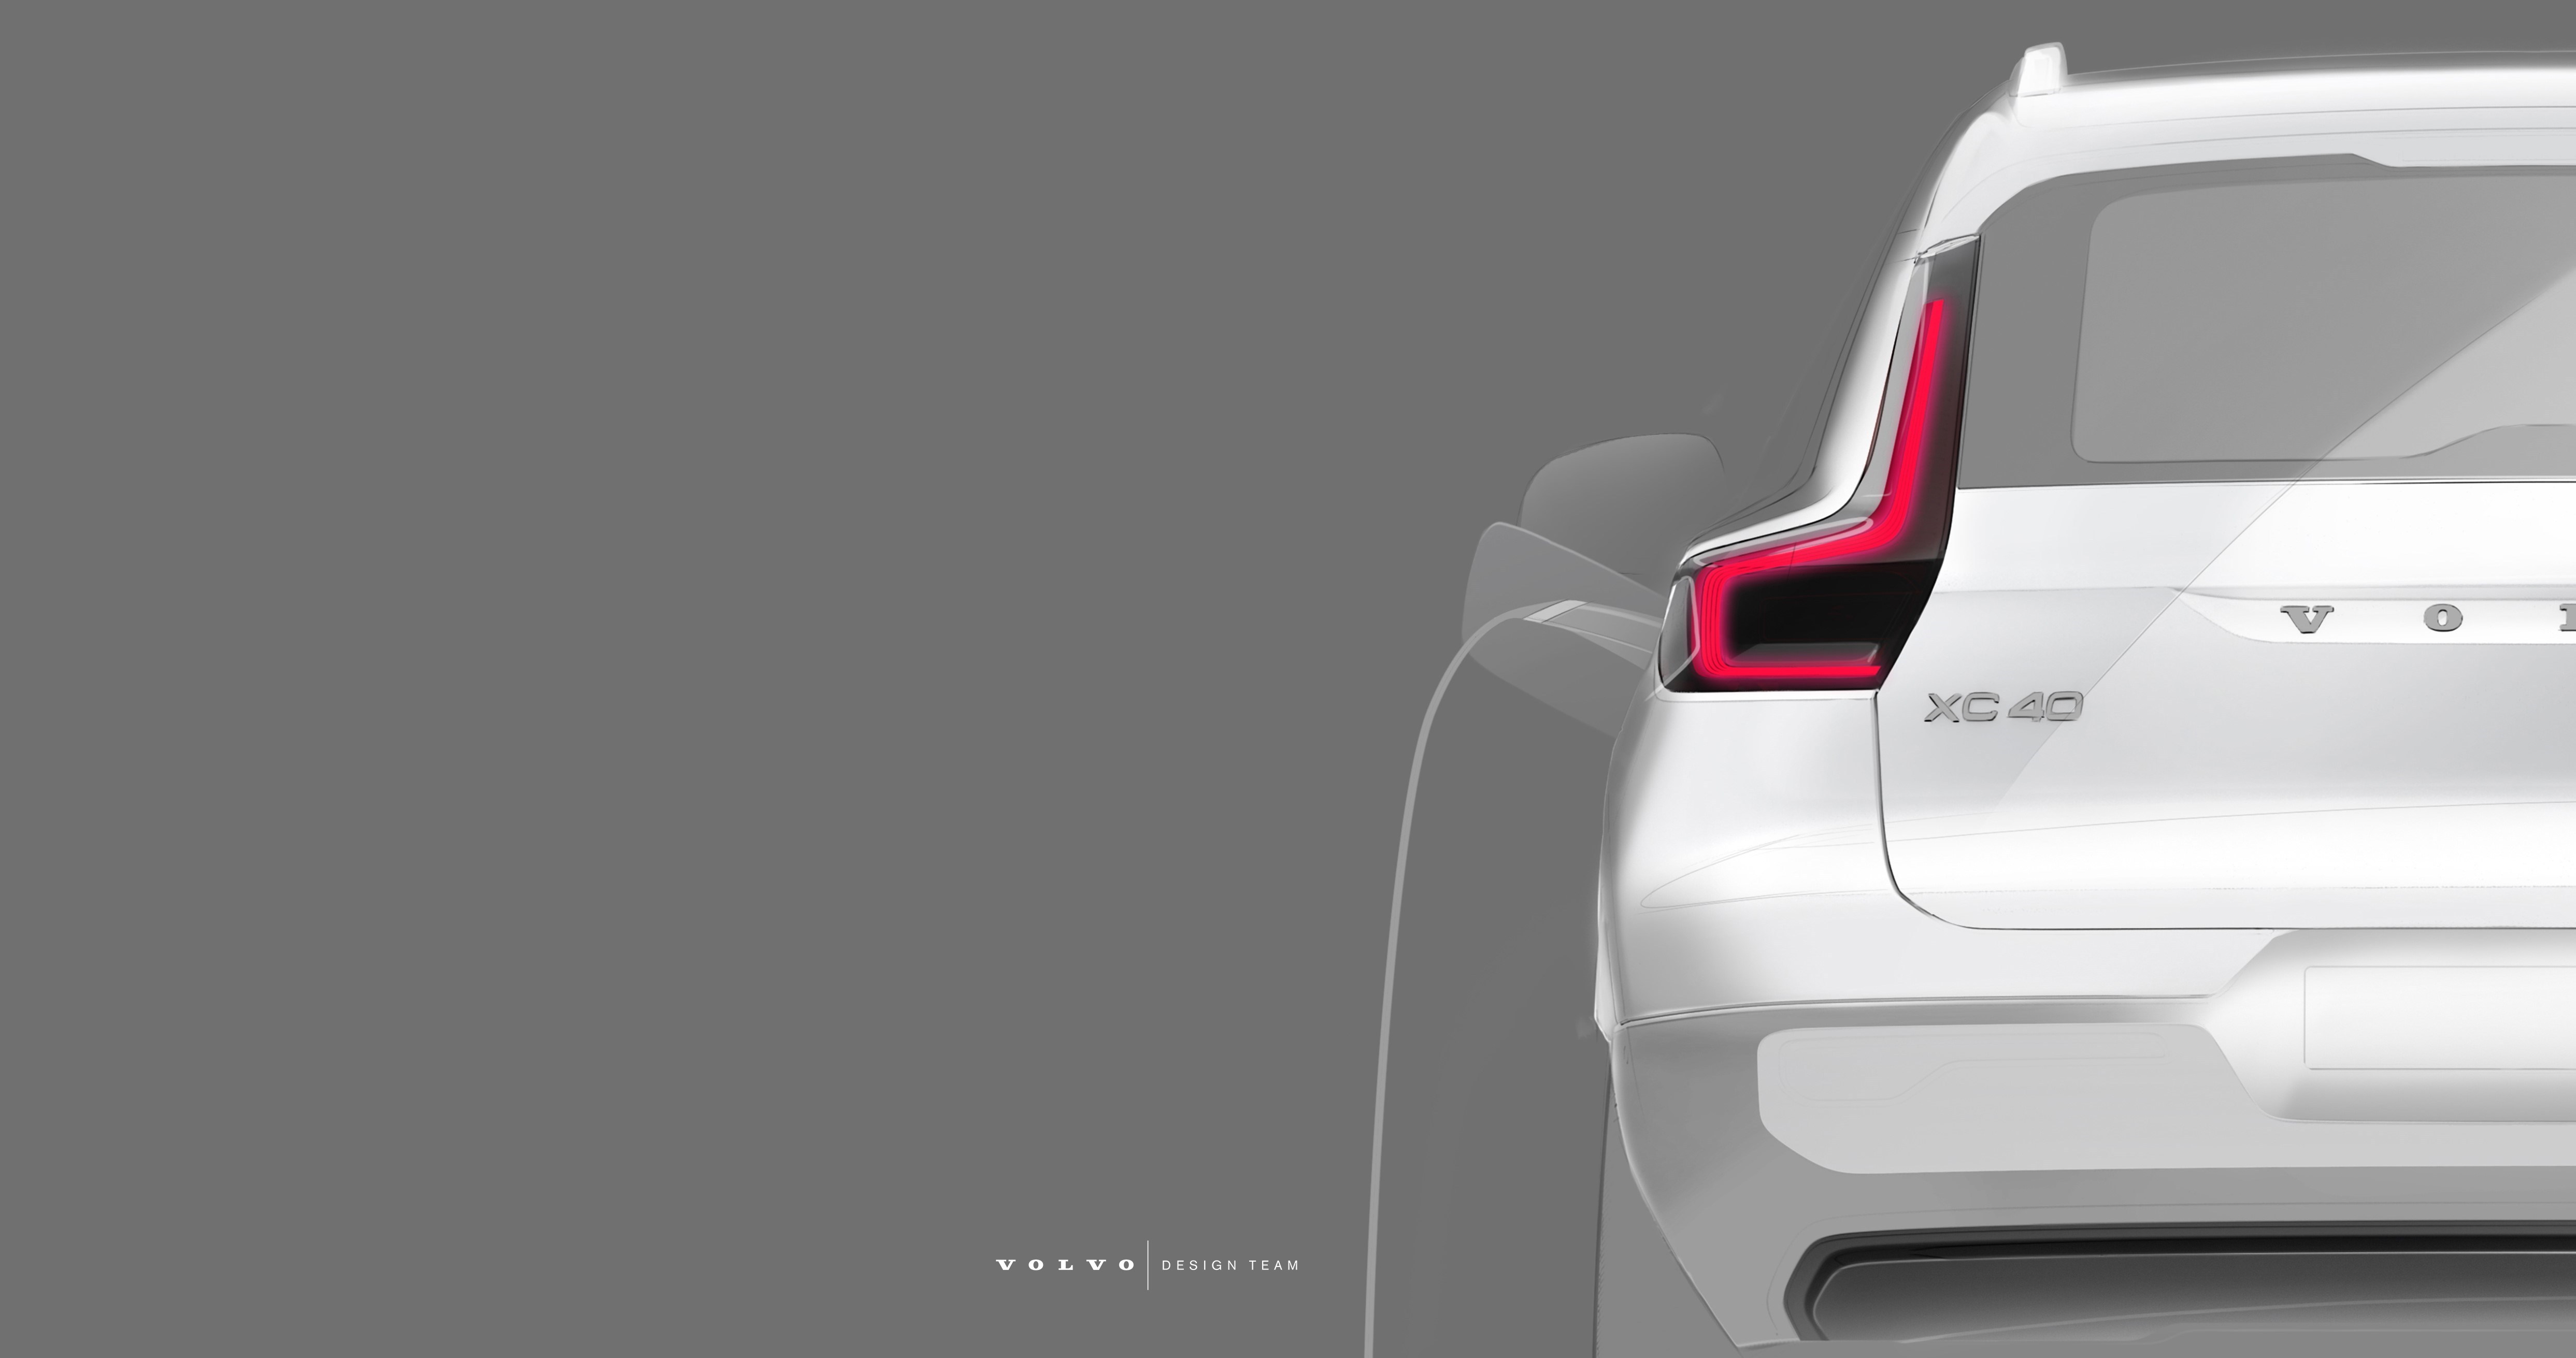 ?????????? Live ?????? ???????????????????? ?????? ?????????????????????? Volvo XC40 full electric (link)